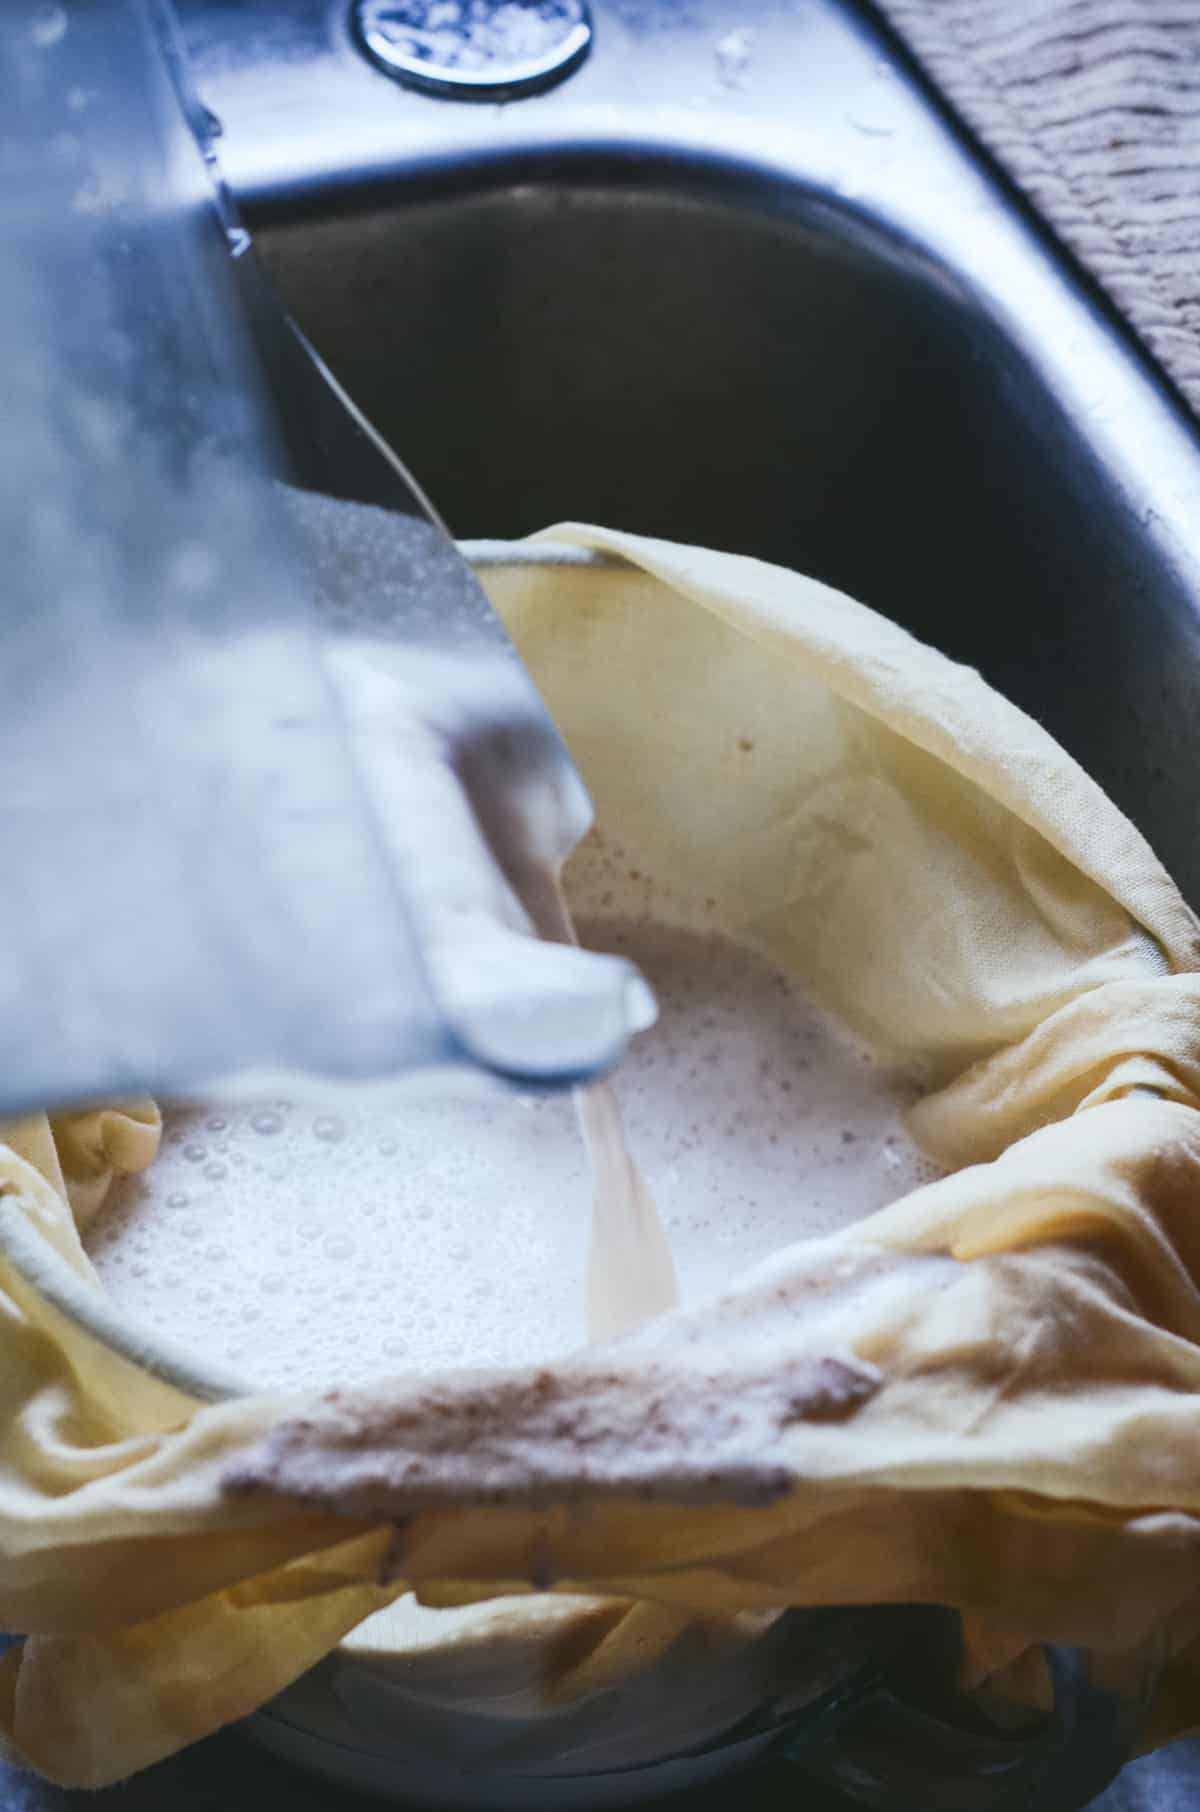 Almond milk being poured into a nut milk bag into a glass bowl.